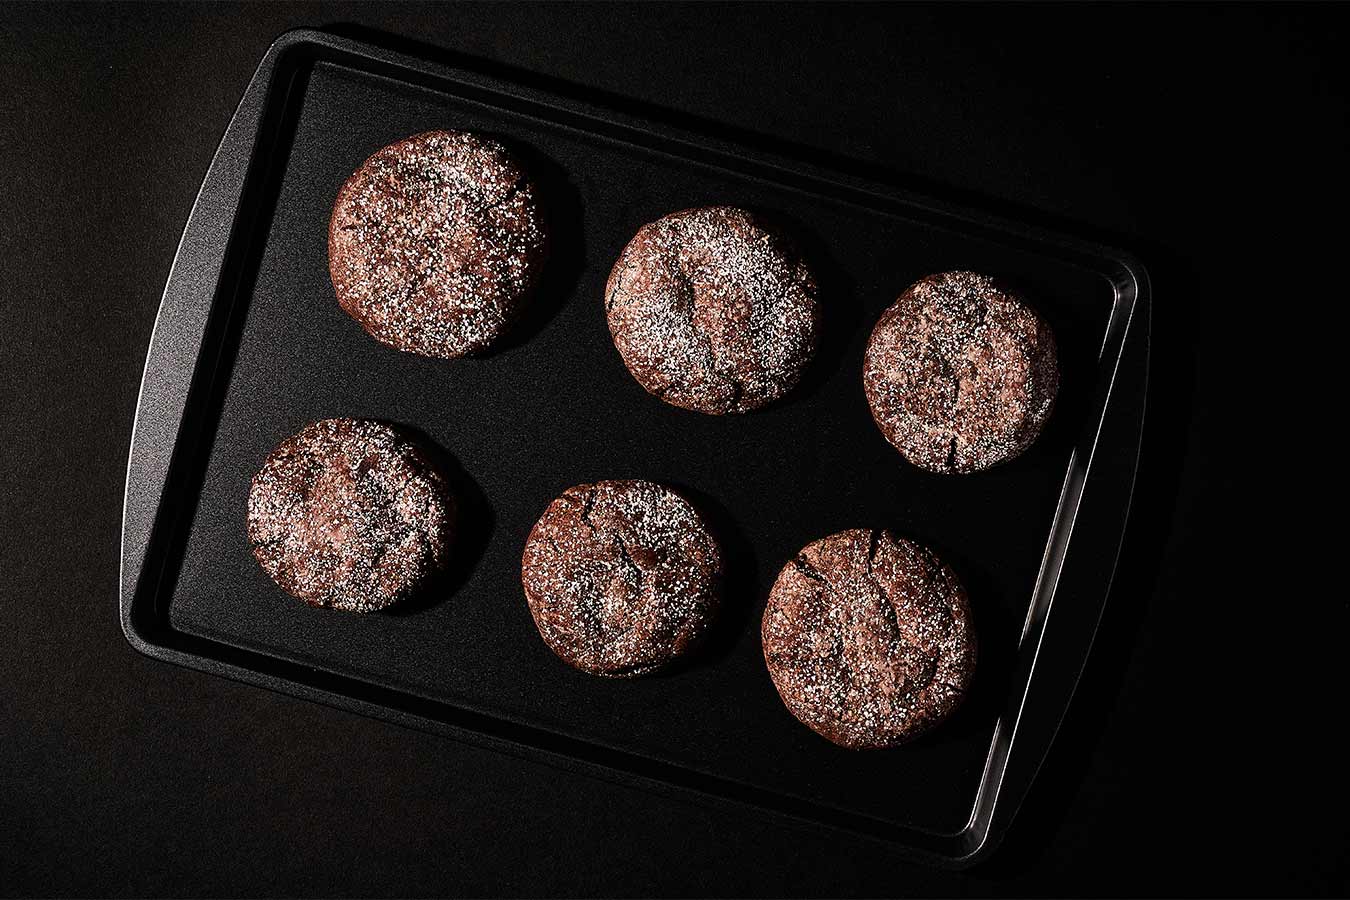 Six chocolate cookies sprinkled with powdered sugar on a black cookie sheet.